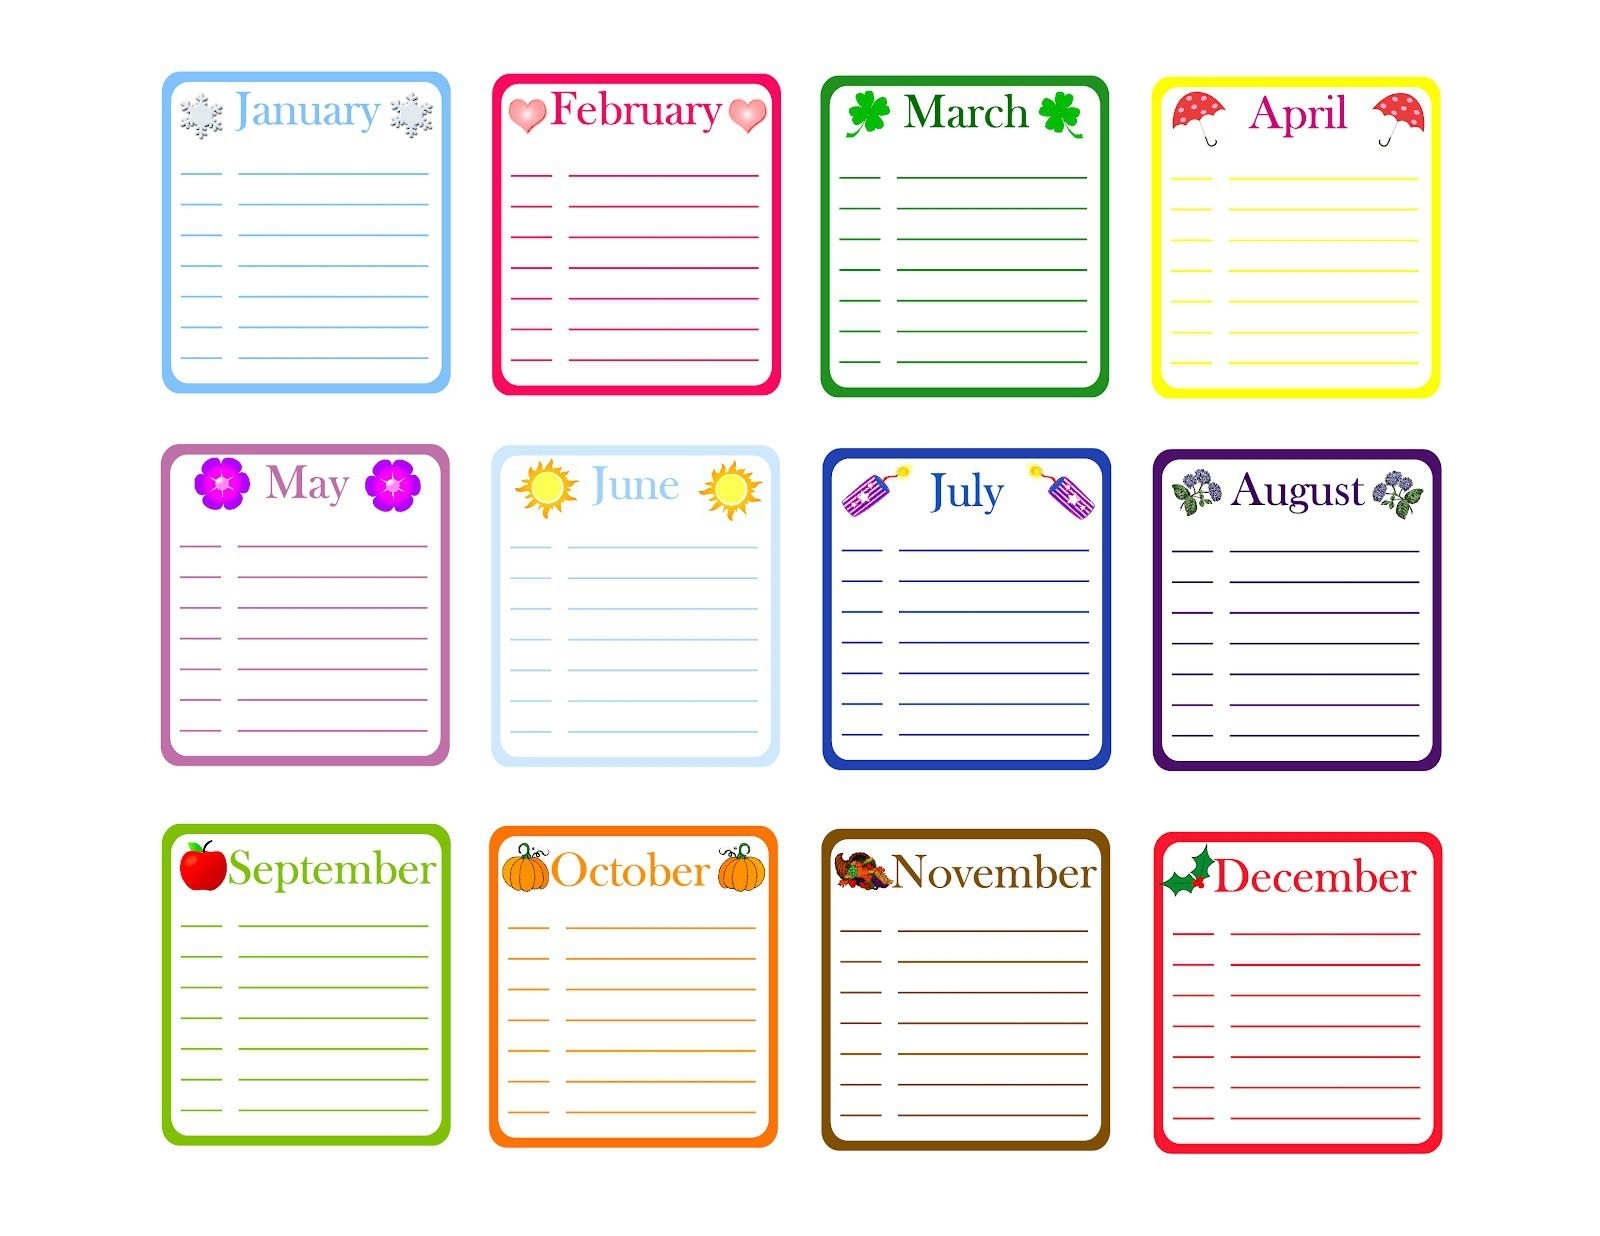 Yearly Birthday Calendar Template. Free Classroom Printables intended for Free Images Of Birthday Calanders